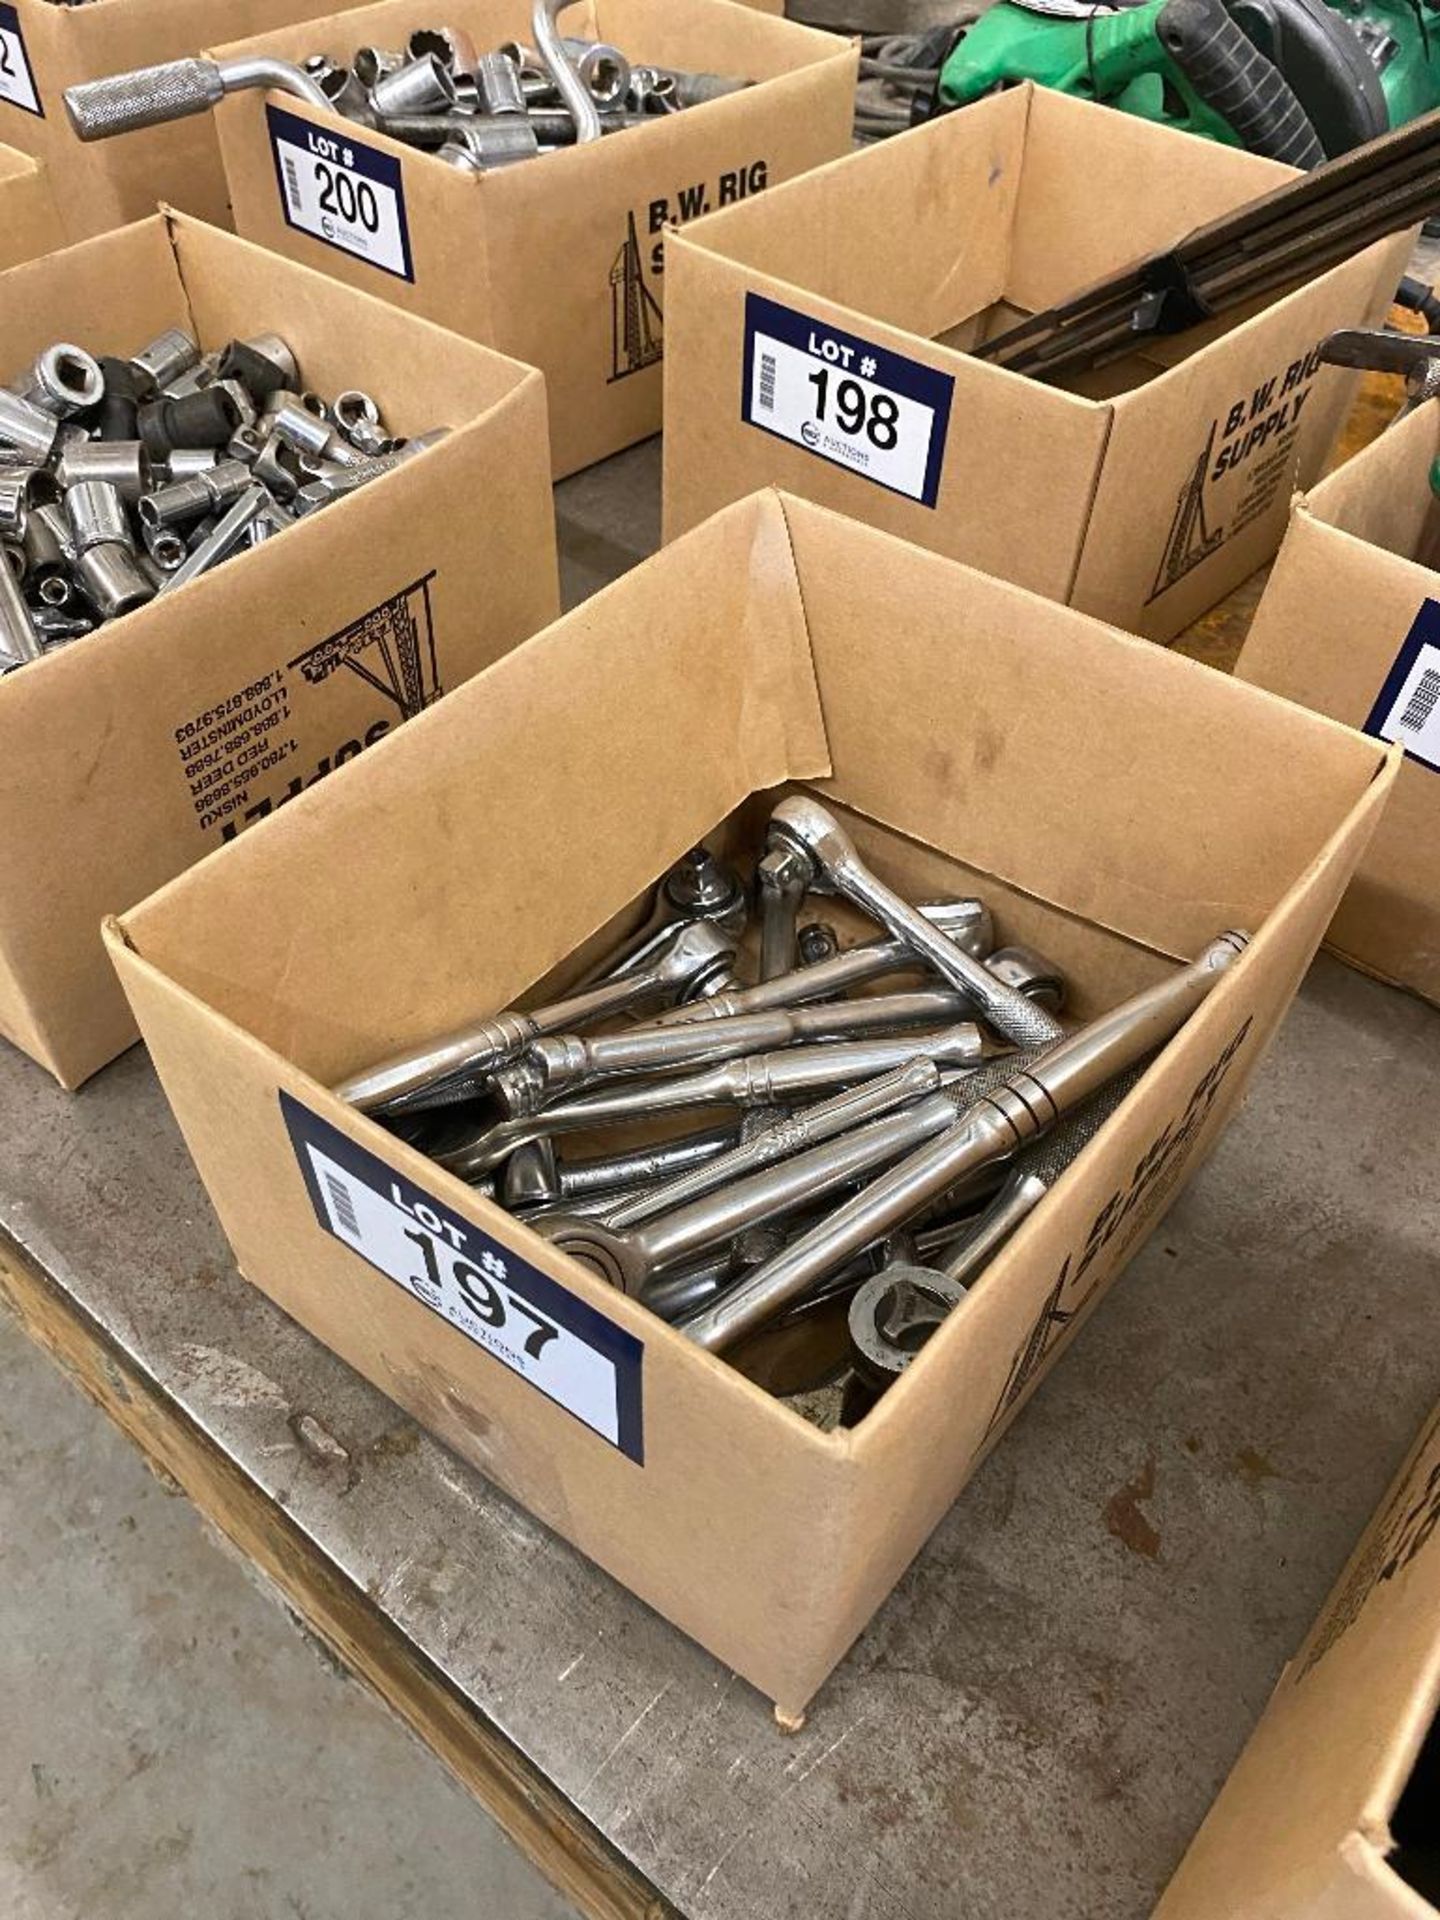 Lot of Asst. Socket Wrenches. - Image 3 of 3